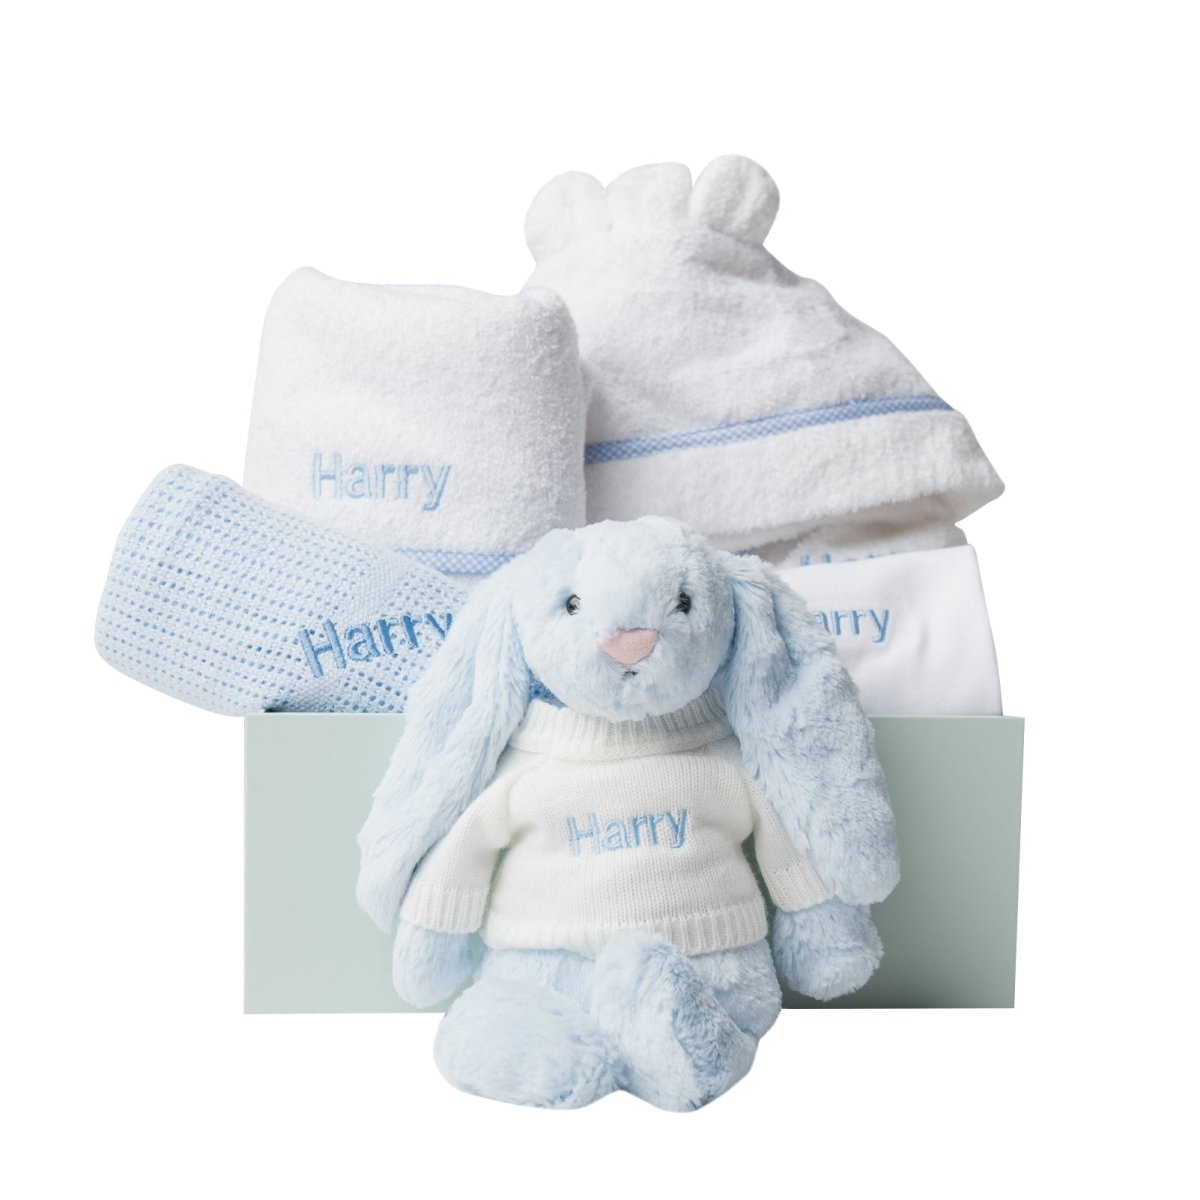 Personalised Baby gifts - Joyto Baby Products